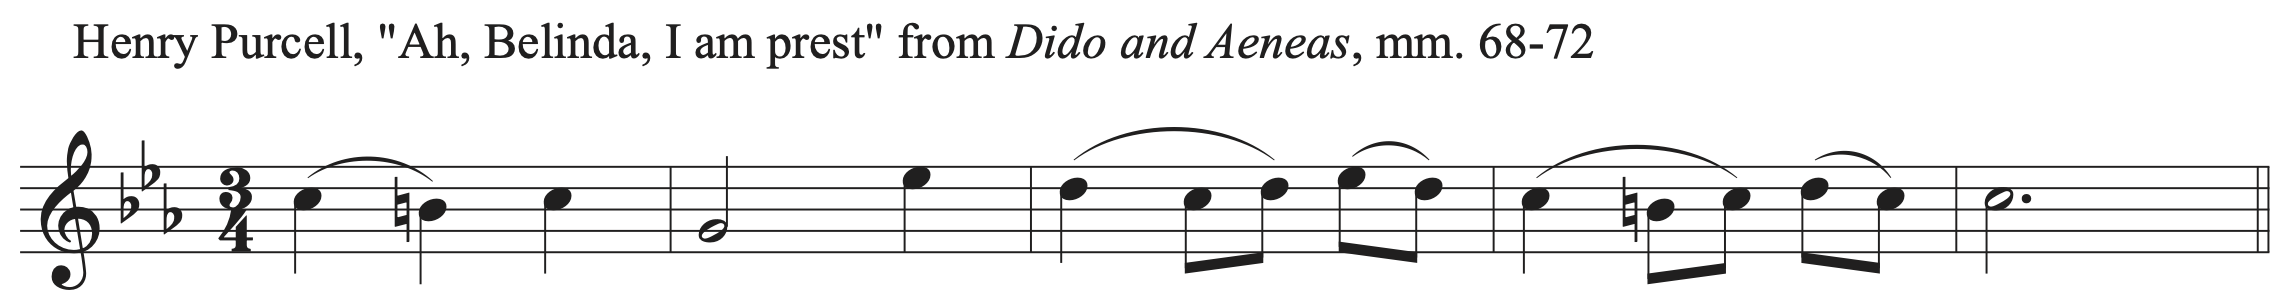 Excerpt from Henry Purcell, "Ah, Belinda, I am prest" from Dido and Aeneas, measures 68 to 72.